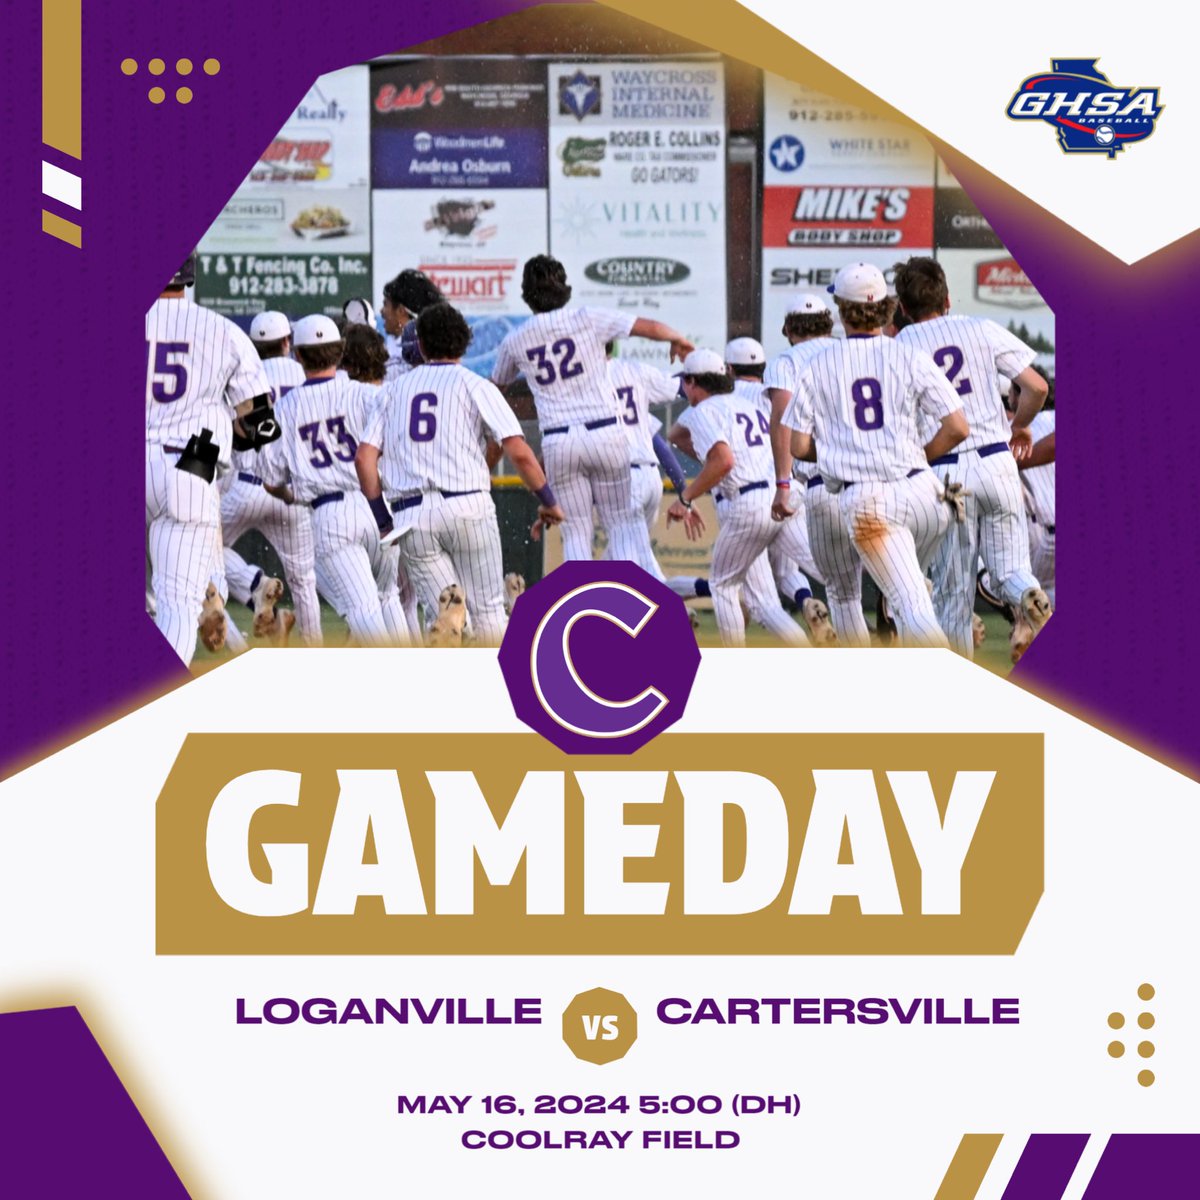 It’s State Championship Game Day! Cartersville faces Loganville in the GHSA AAAAA State Finals today at Coolray Field in Lawrenceville. Game 1 of the DH is scheduled to begin at 5:00PM.